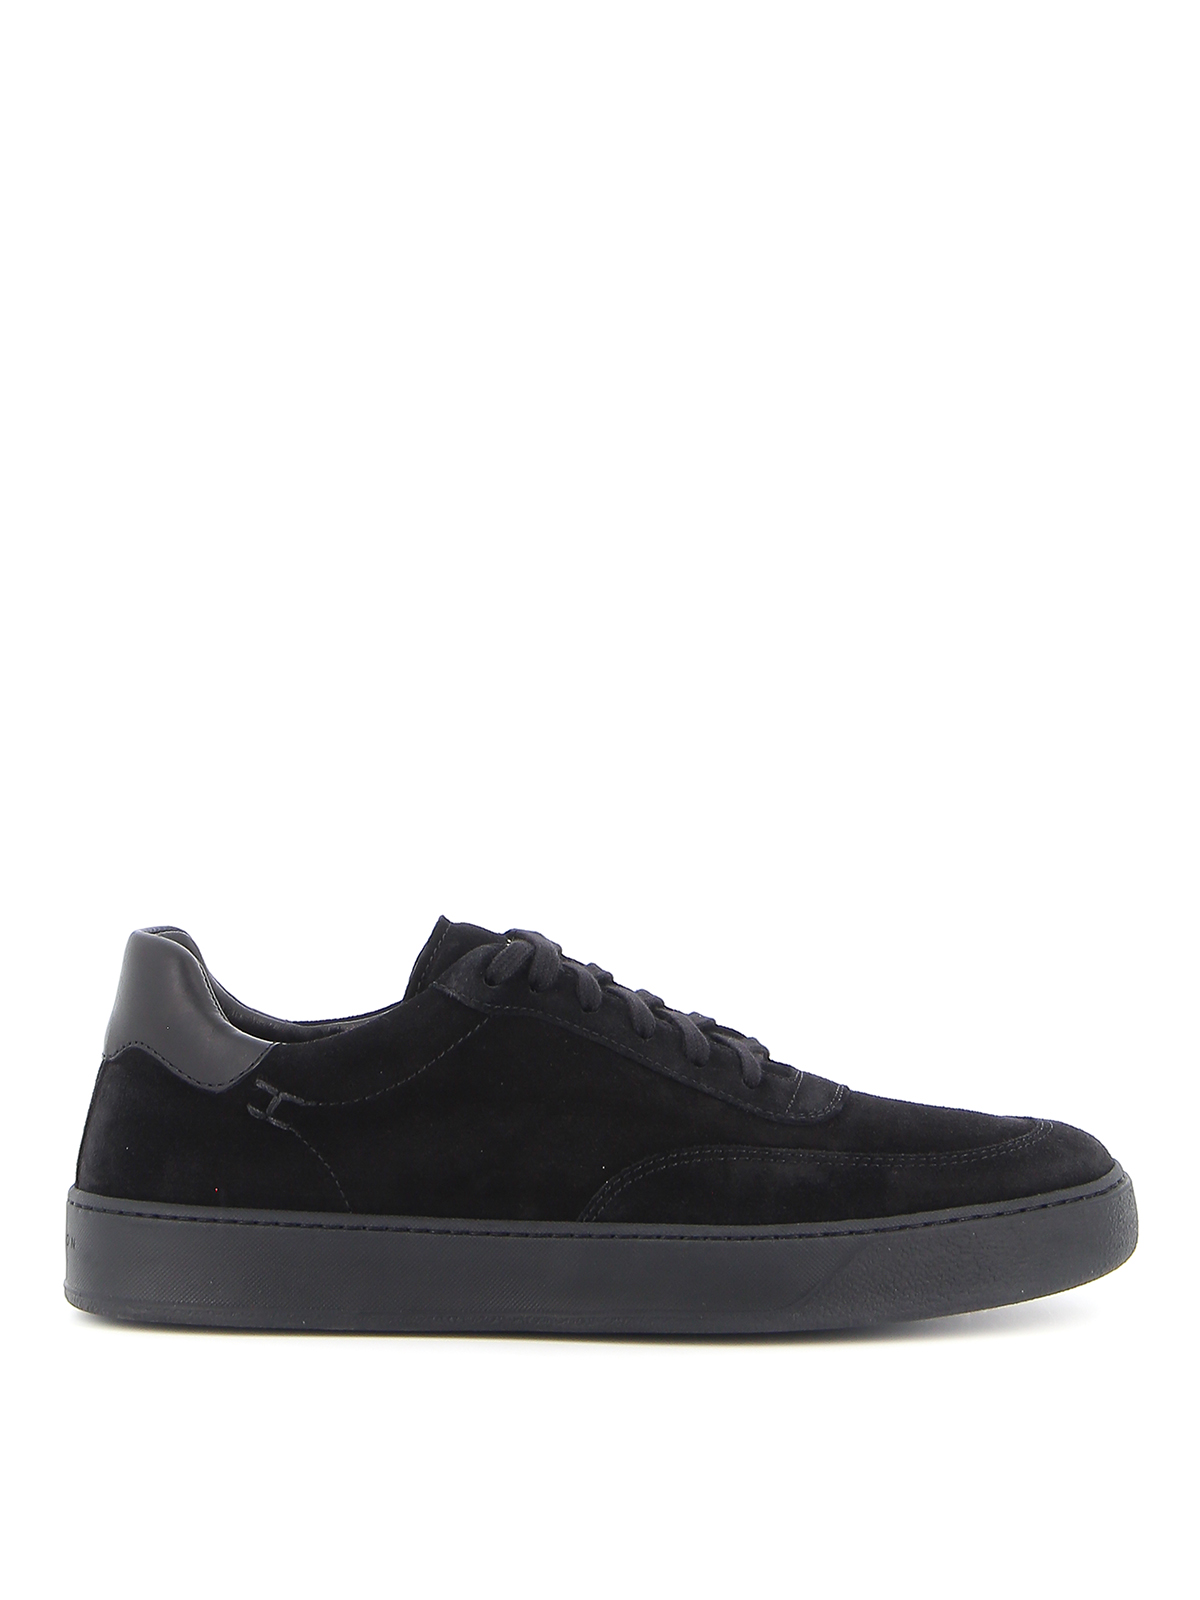 Trainers Henderson - Mitch sneakers - MITCHBLACK | Shop online at iKRIX